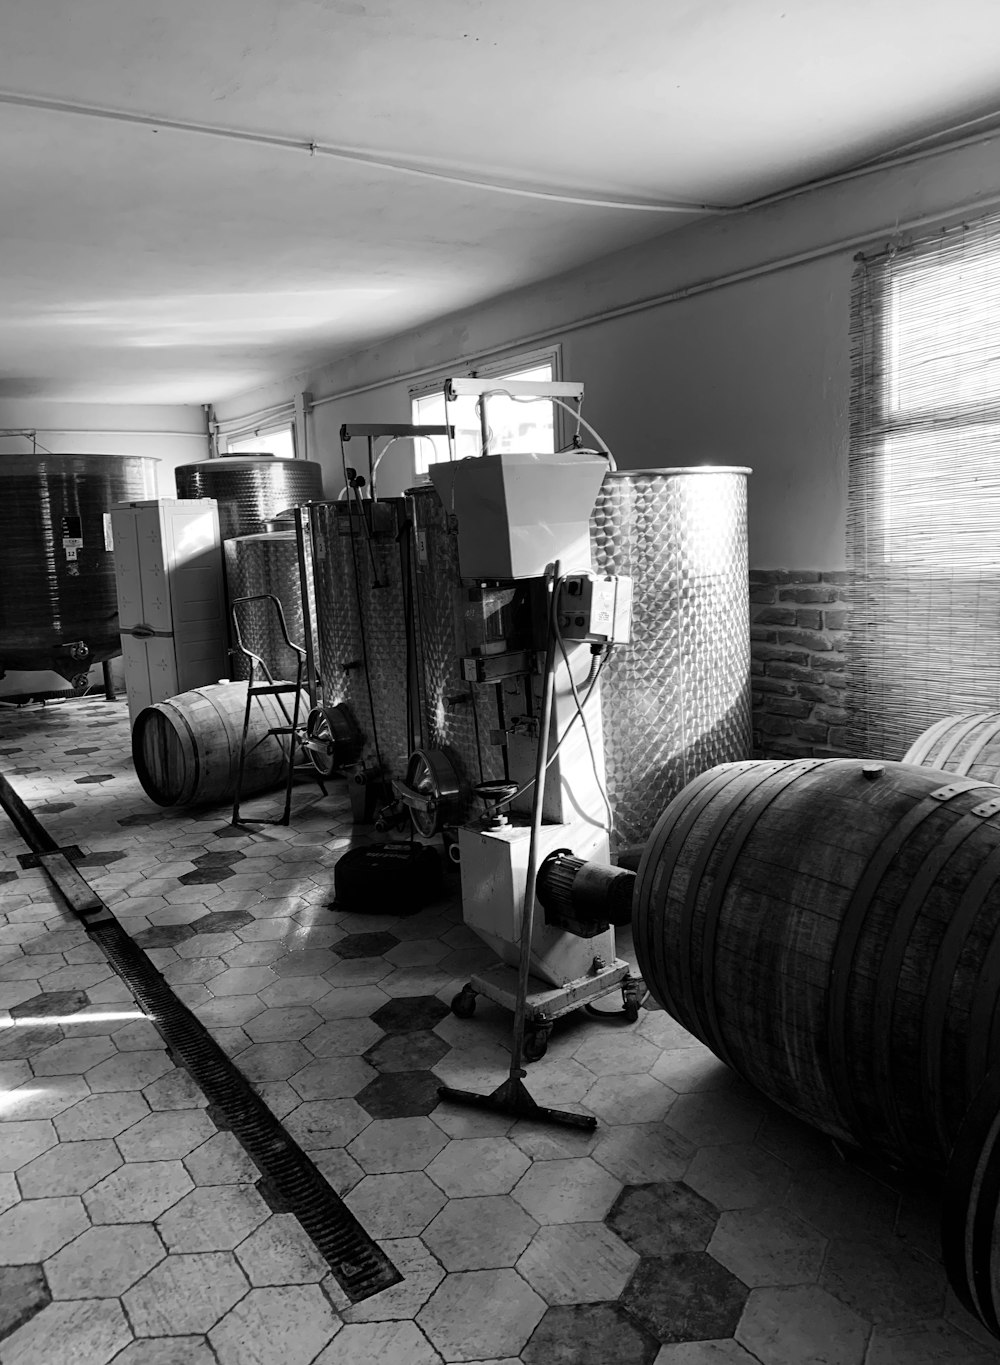 a black and white photo of a room with barrels